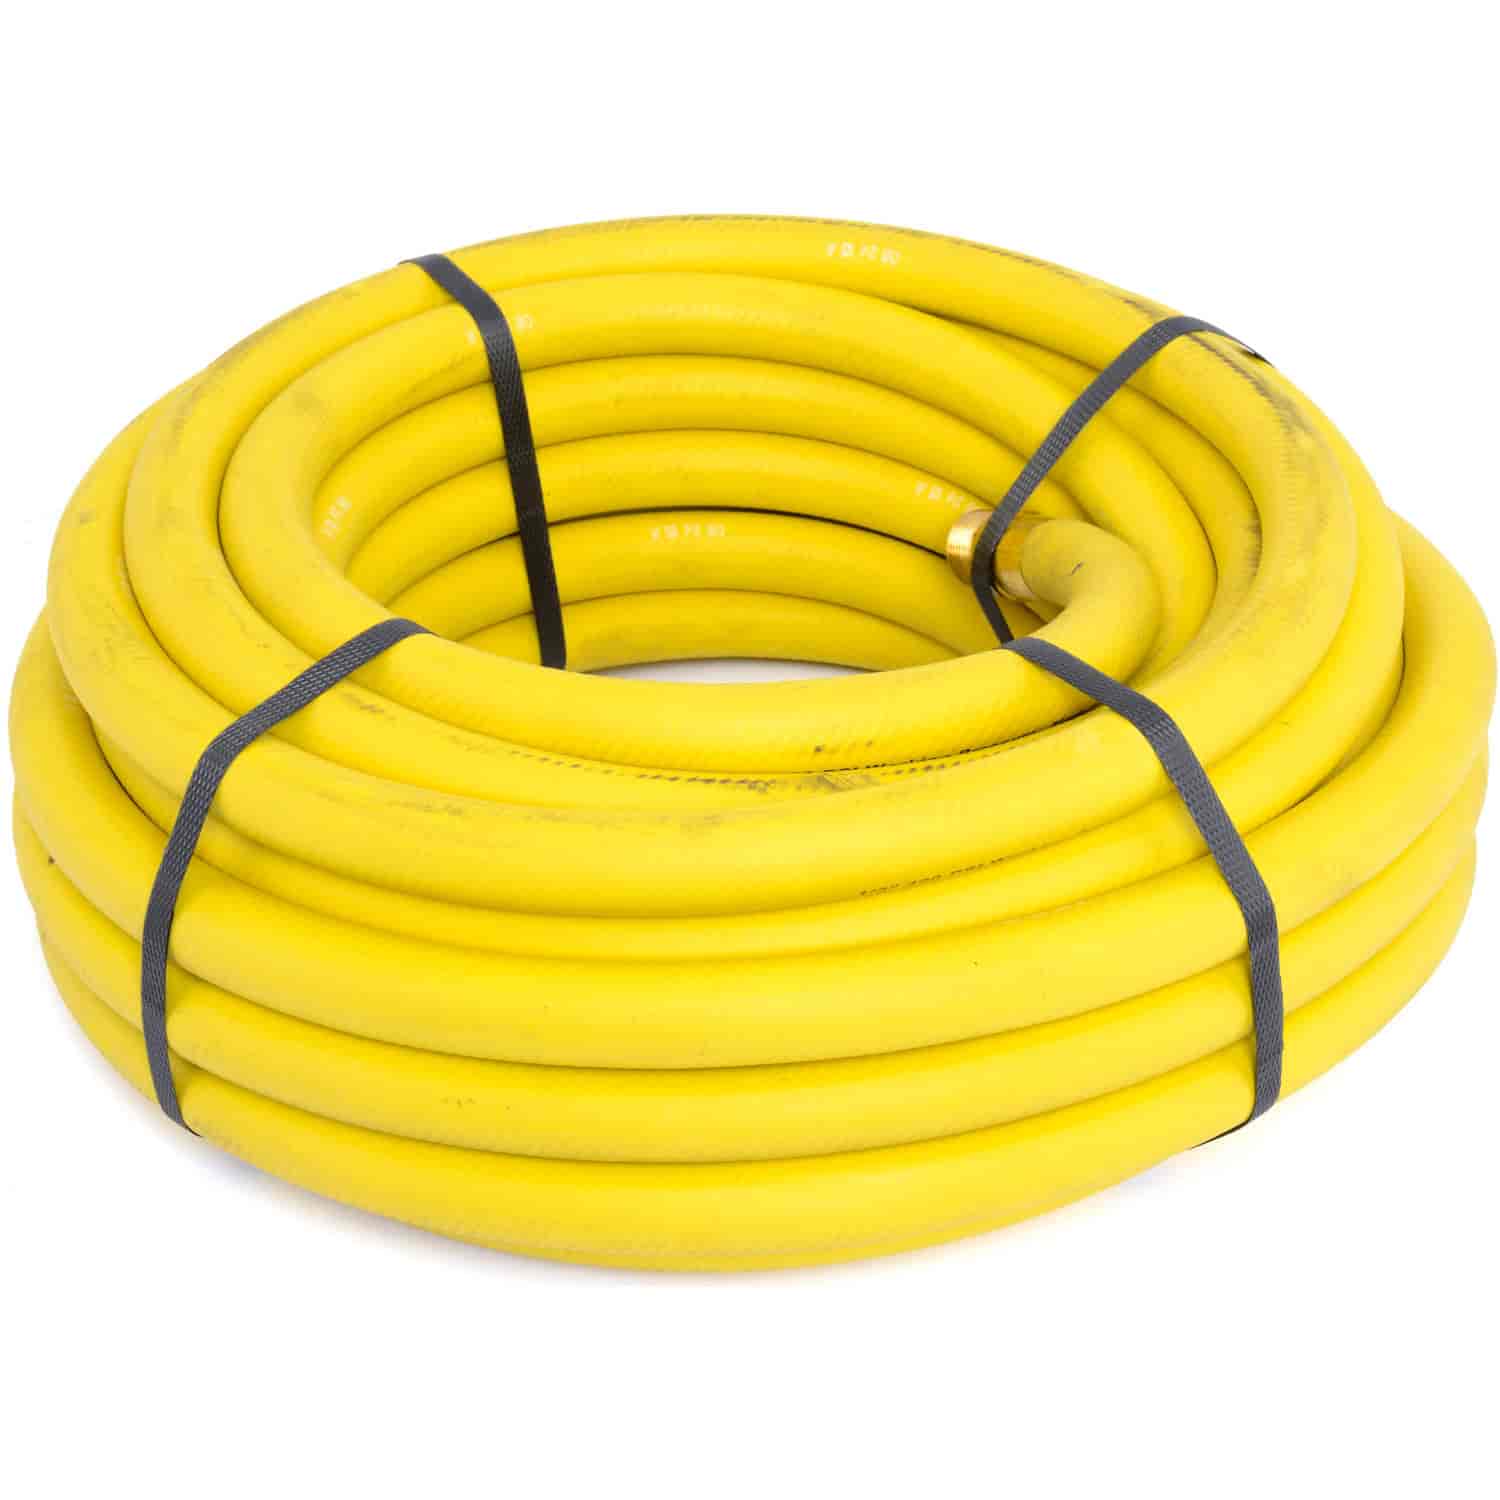 Yellow Rubber Air Hose 1/2"